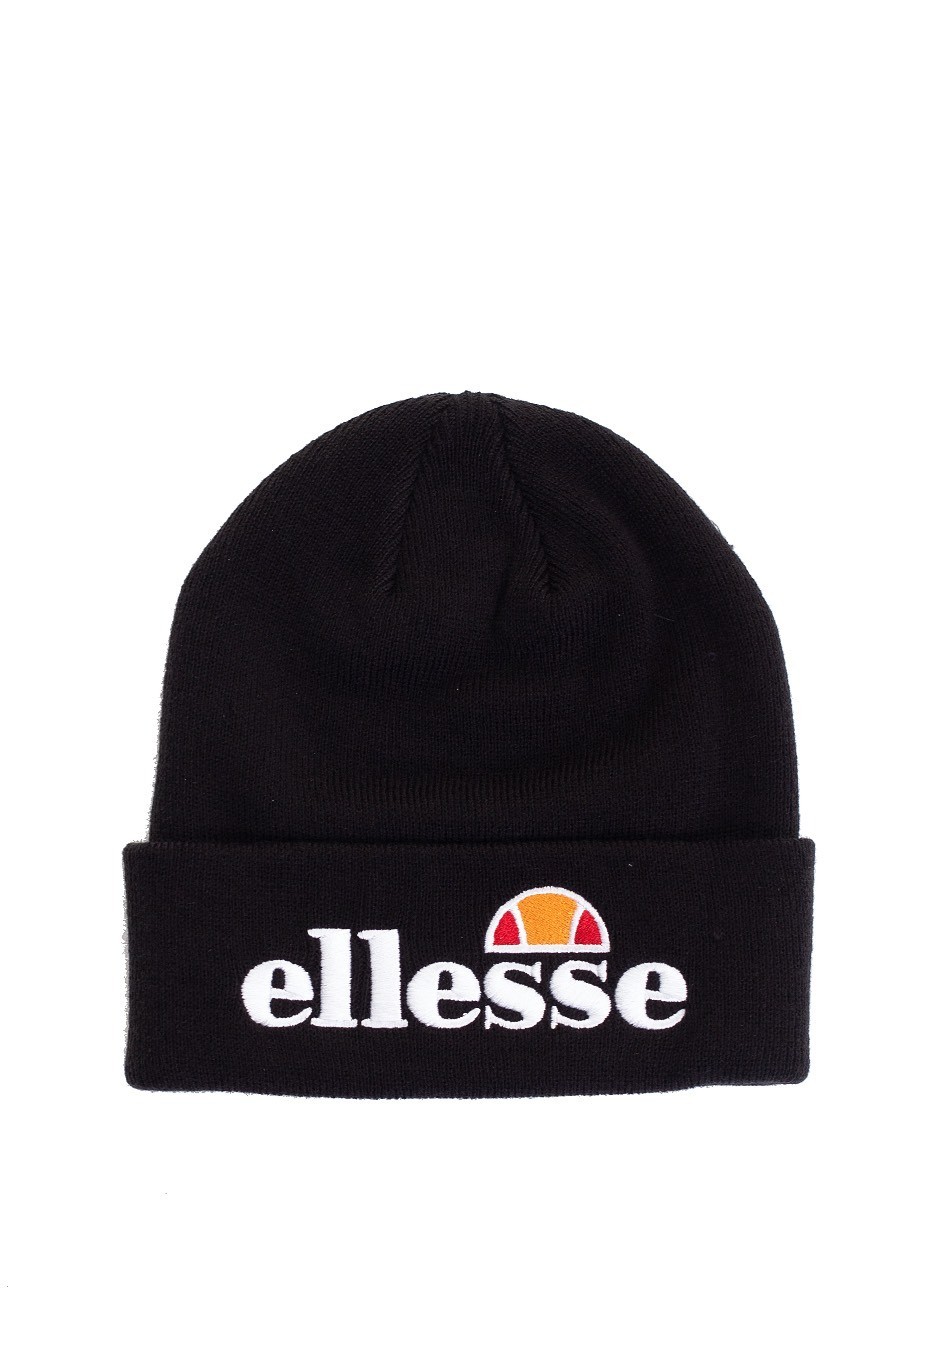 Ellesse - Velly and Bubb Gift Pk Black - Beanies